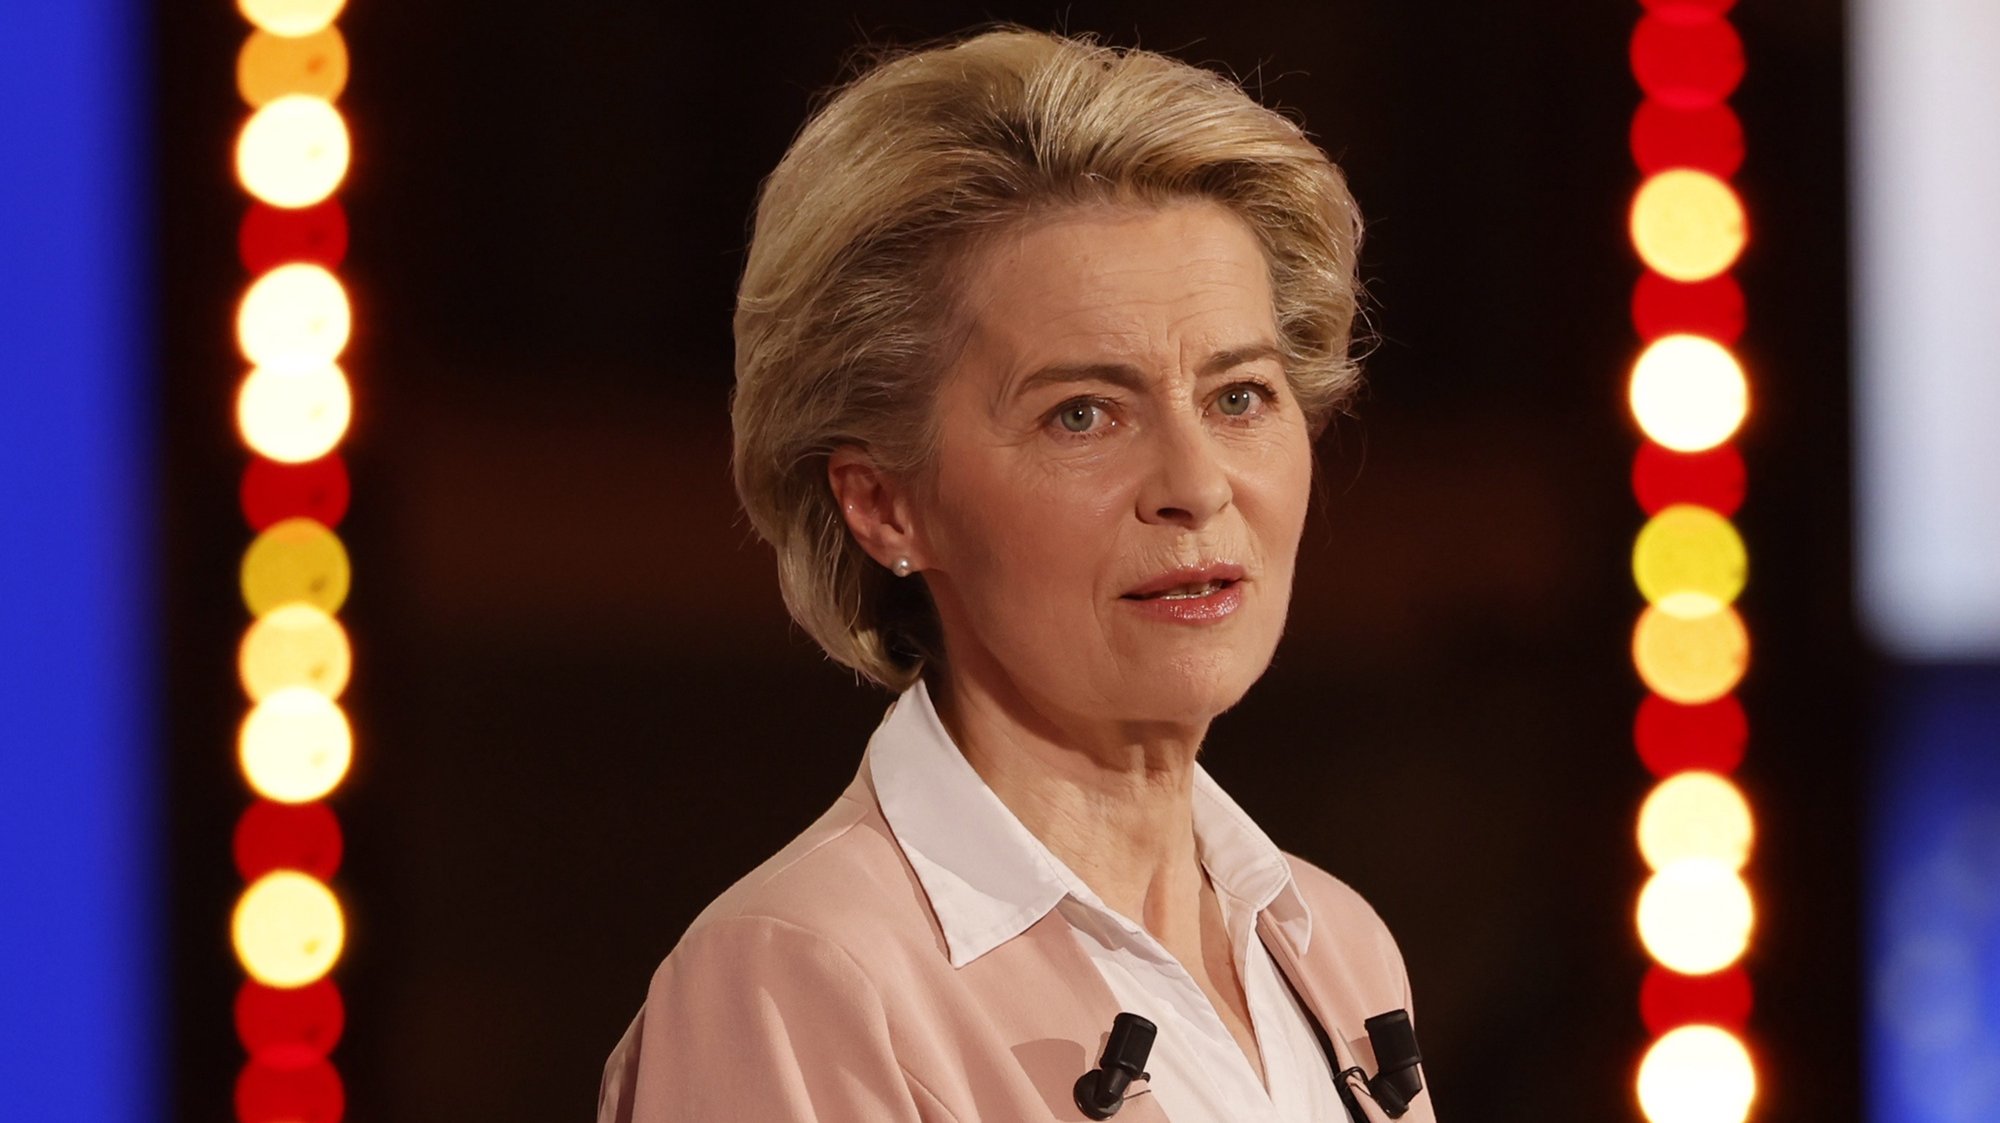 epa09187686 European Commission President Ursula von der Leyen delivers her speech during the Future of Europe conference at the European Parliament in Strasbourg, eastern France, Sunday, May 9, 2021.  EPA/Jean-Francois Badias / POOL  MAXPPP OUT